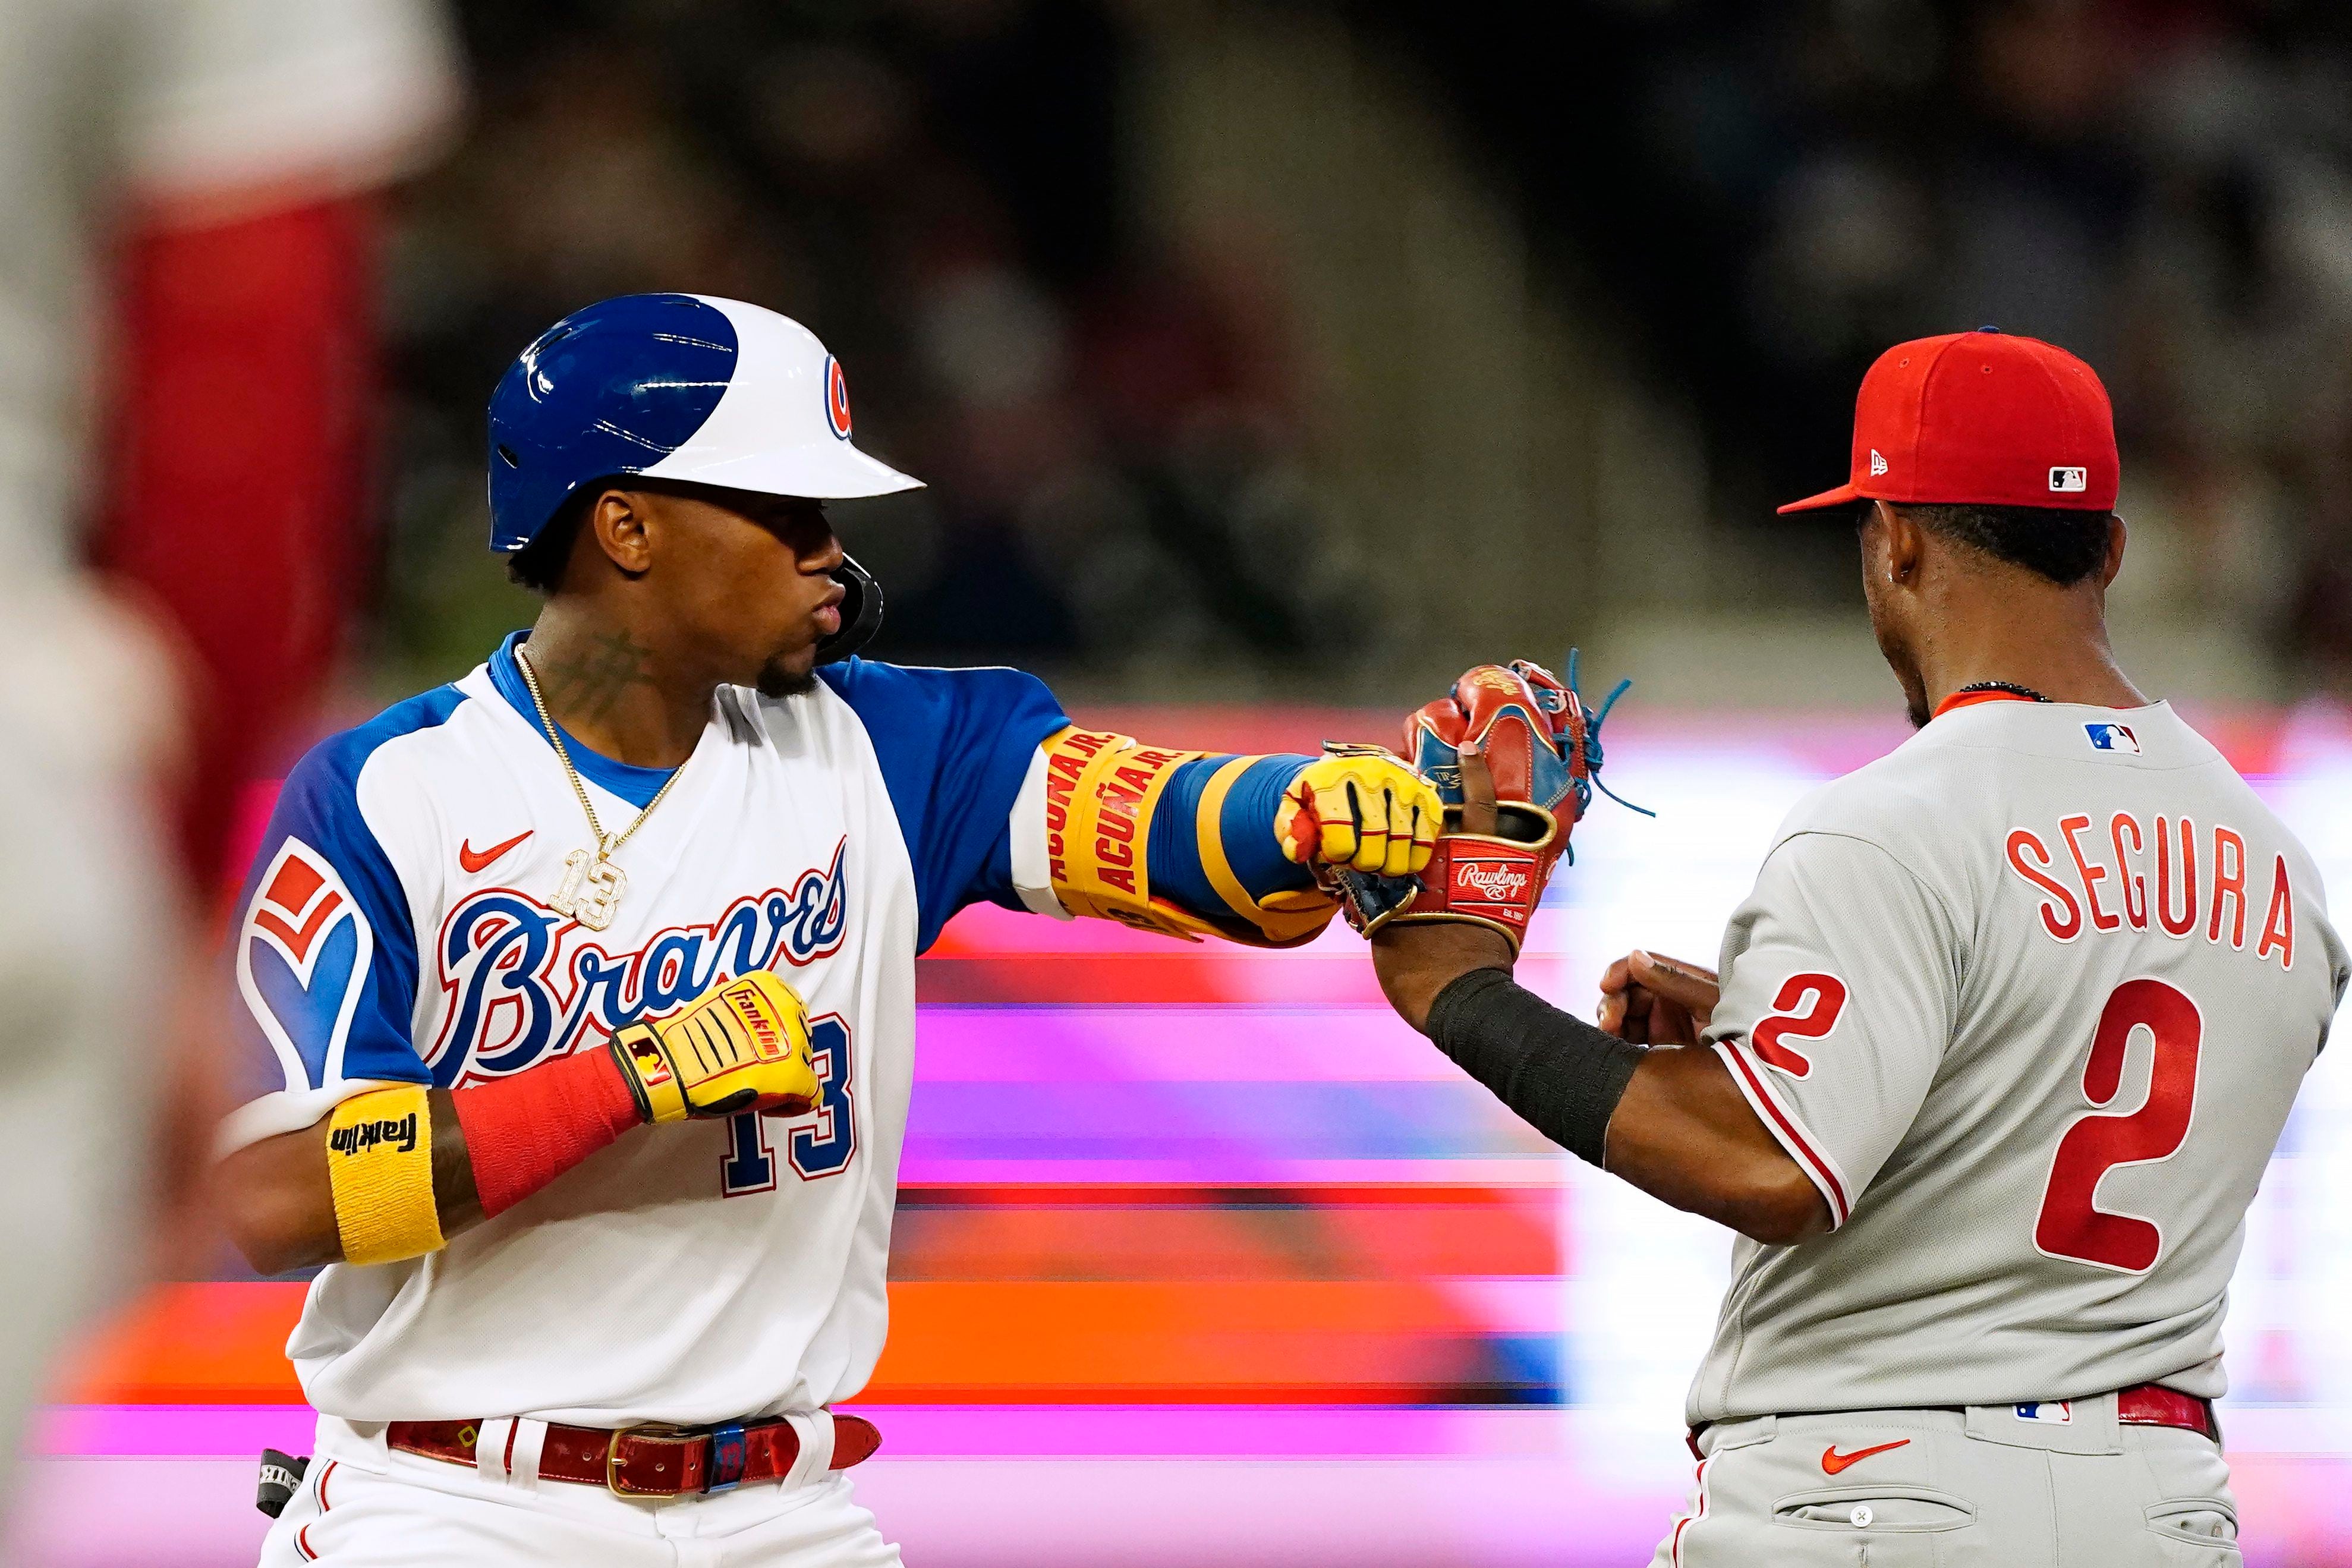 Segura's hit in 10th lifts Phillies over Braves in opener - The